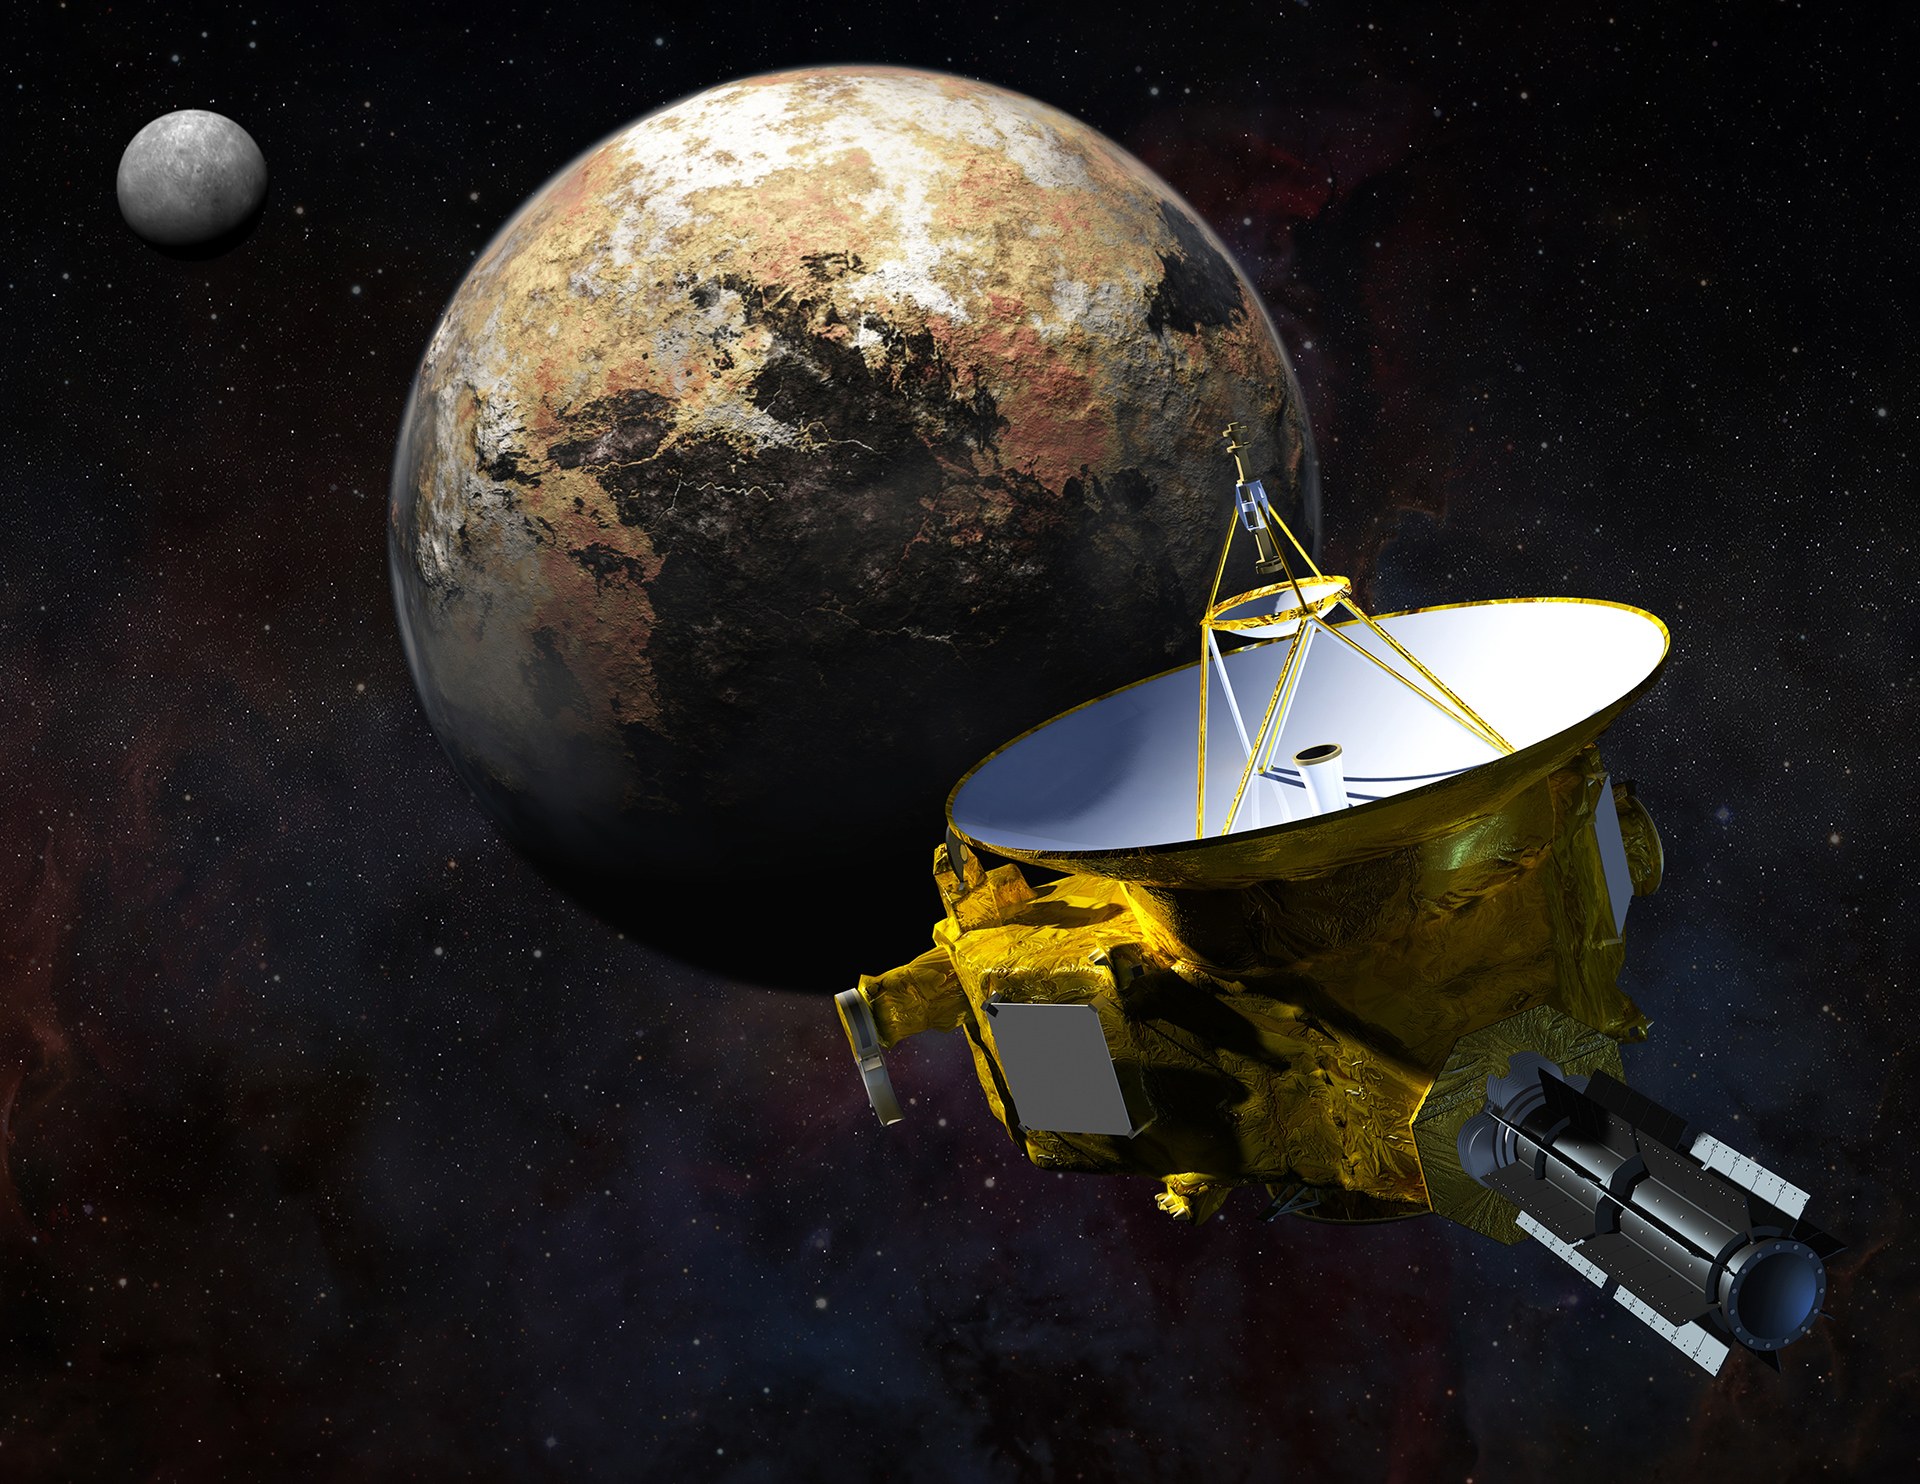 The New Horizons Pluto and Charon flyby in 2015